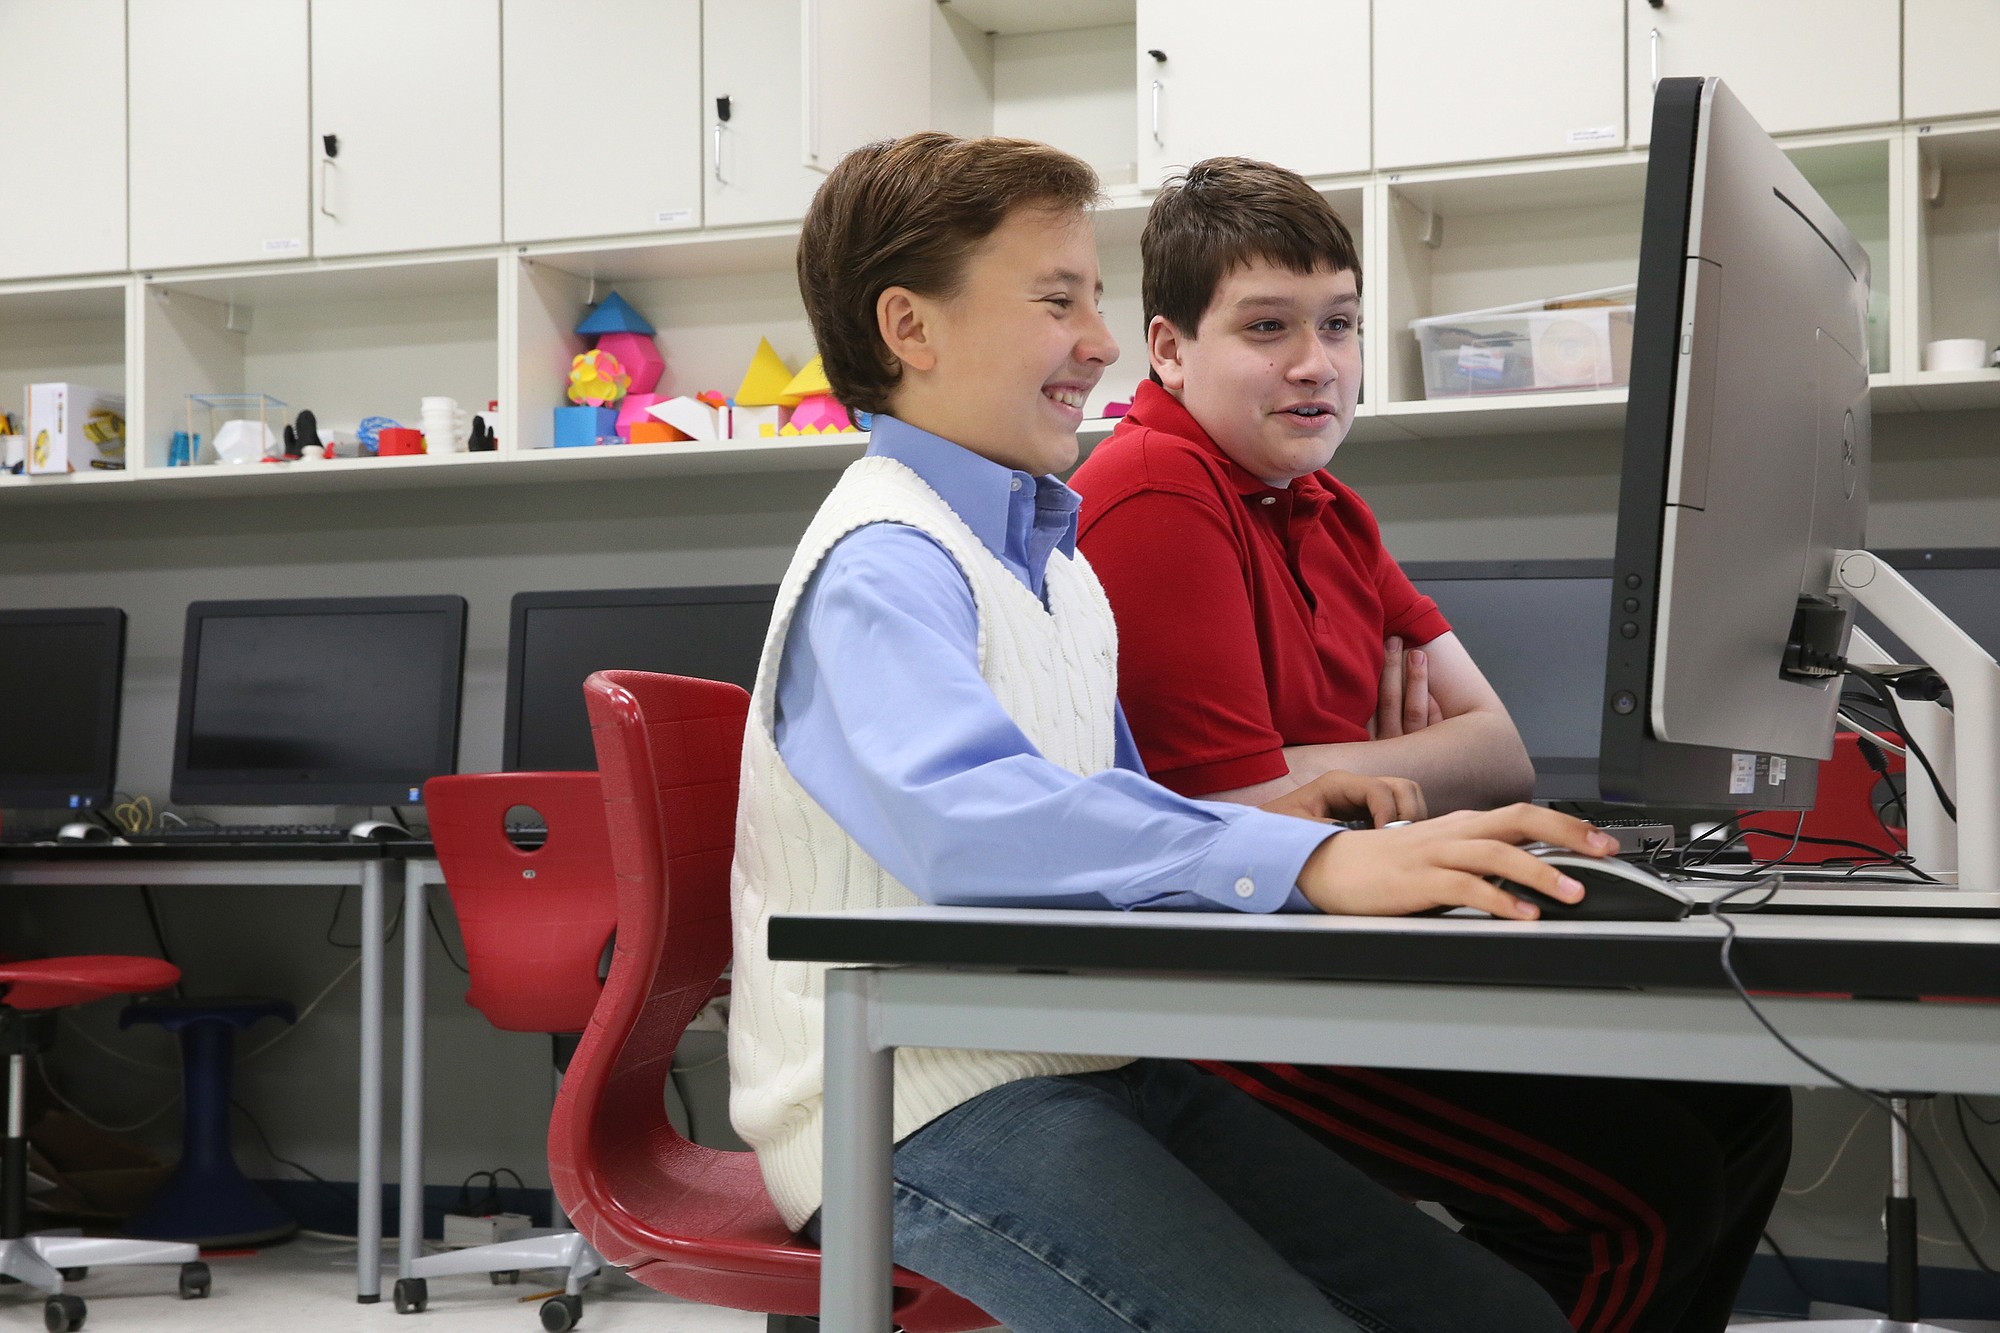 Seventh-graders Mitchell Brown, 12, left, and Scotty Vrablik, 13, work on their website www.cleanminecraftvideos.com in the Innovation Lab at Quest Academy in Palatine, Ill., on Wednesday.